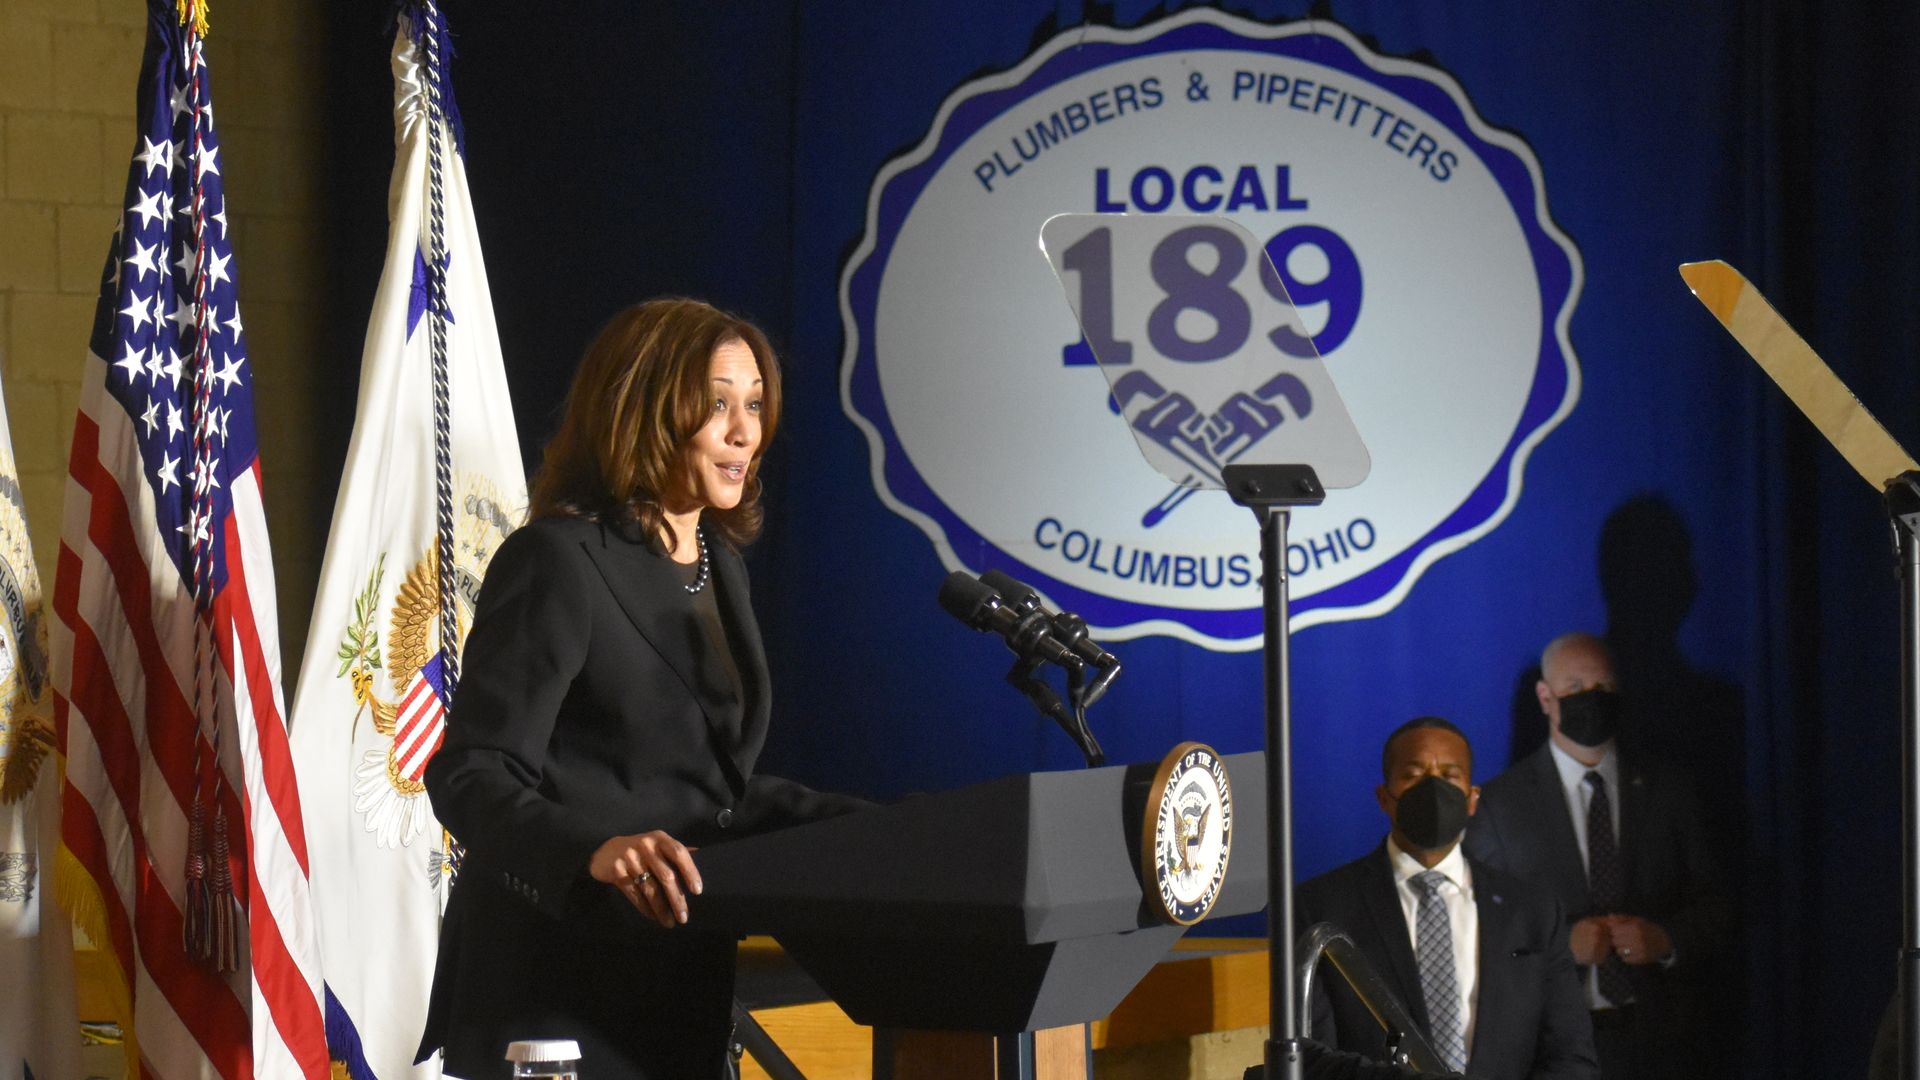 Vice President Kamala Harris speaks at a Columbus union hall with the union's logo on the back wall.